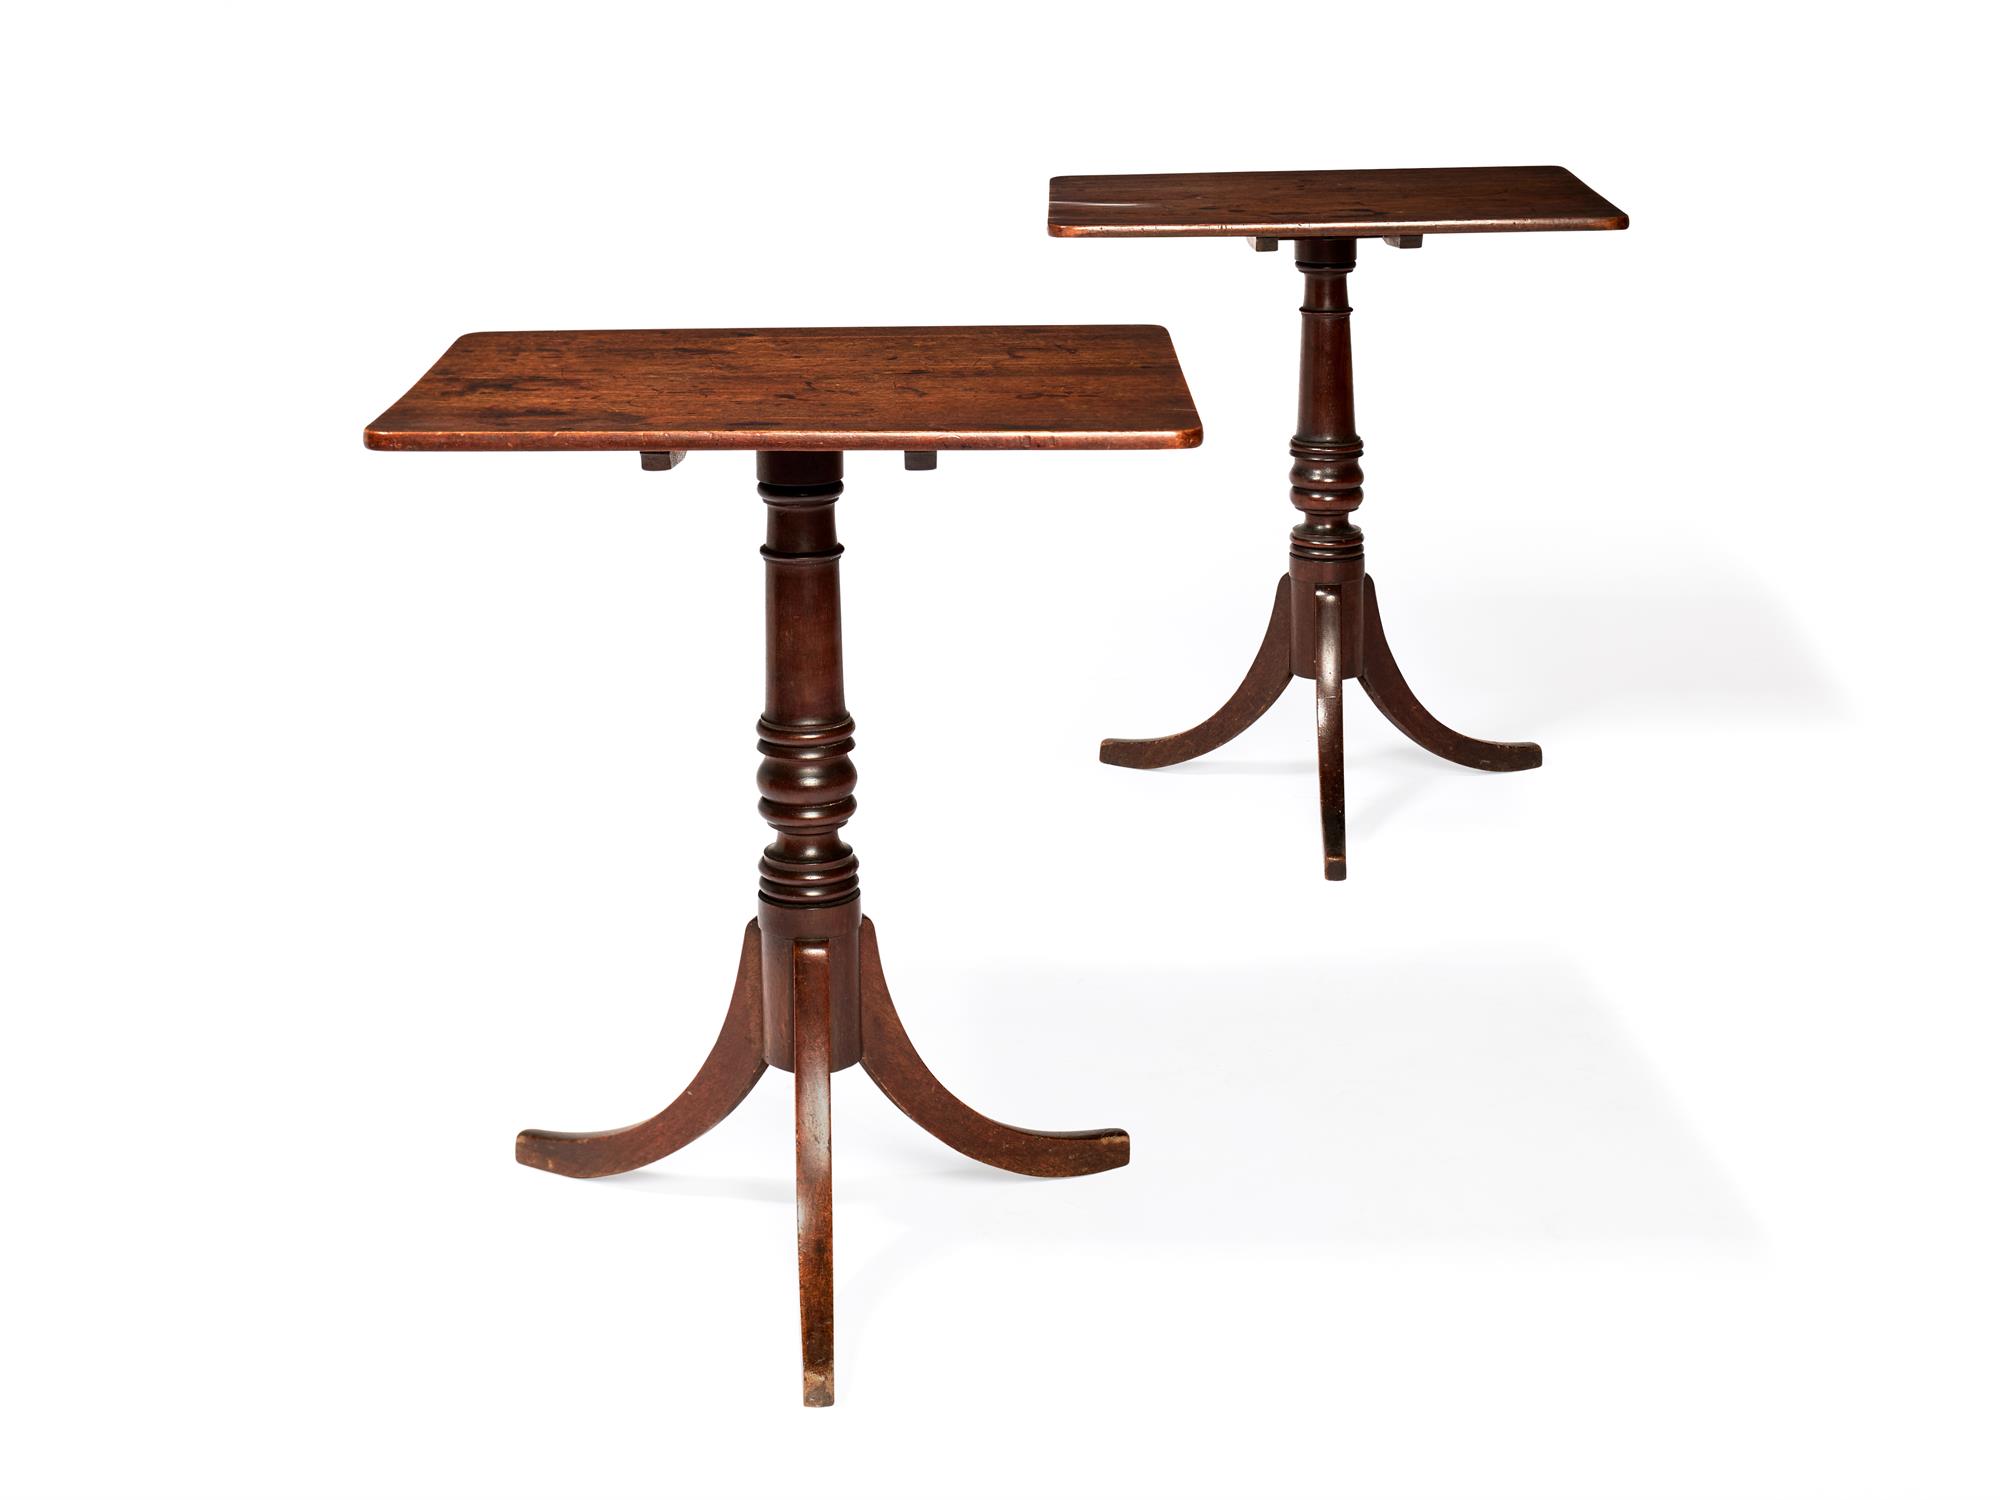 A near pair of Regency occasional tables